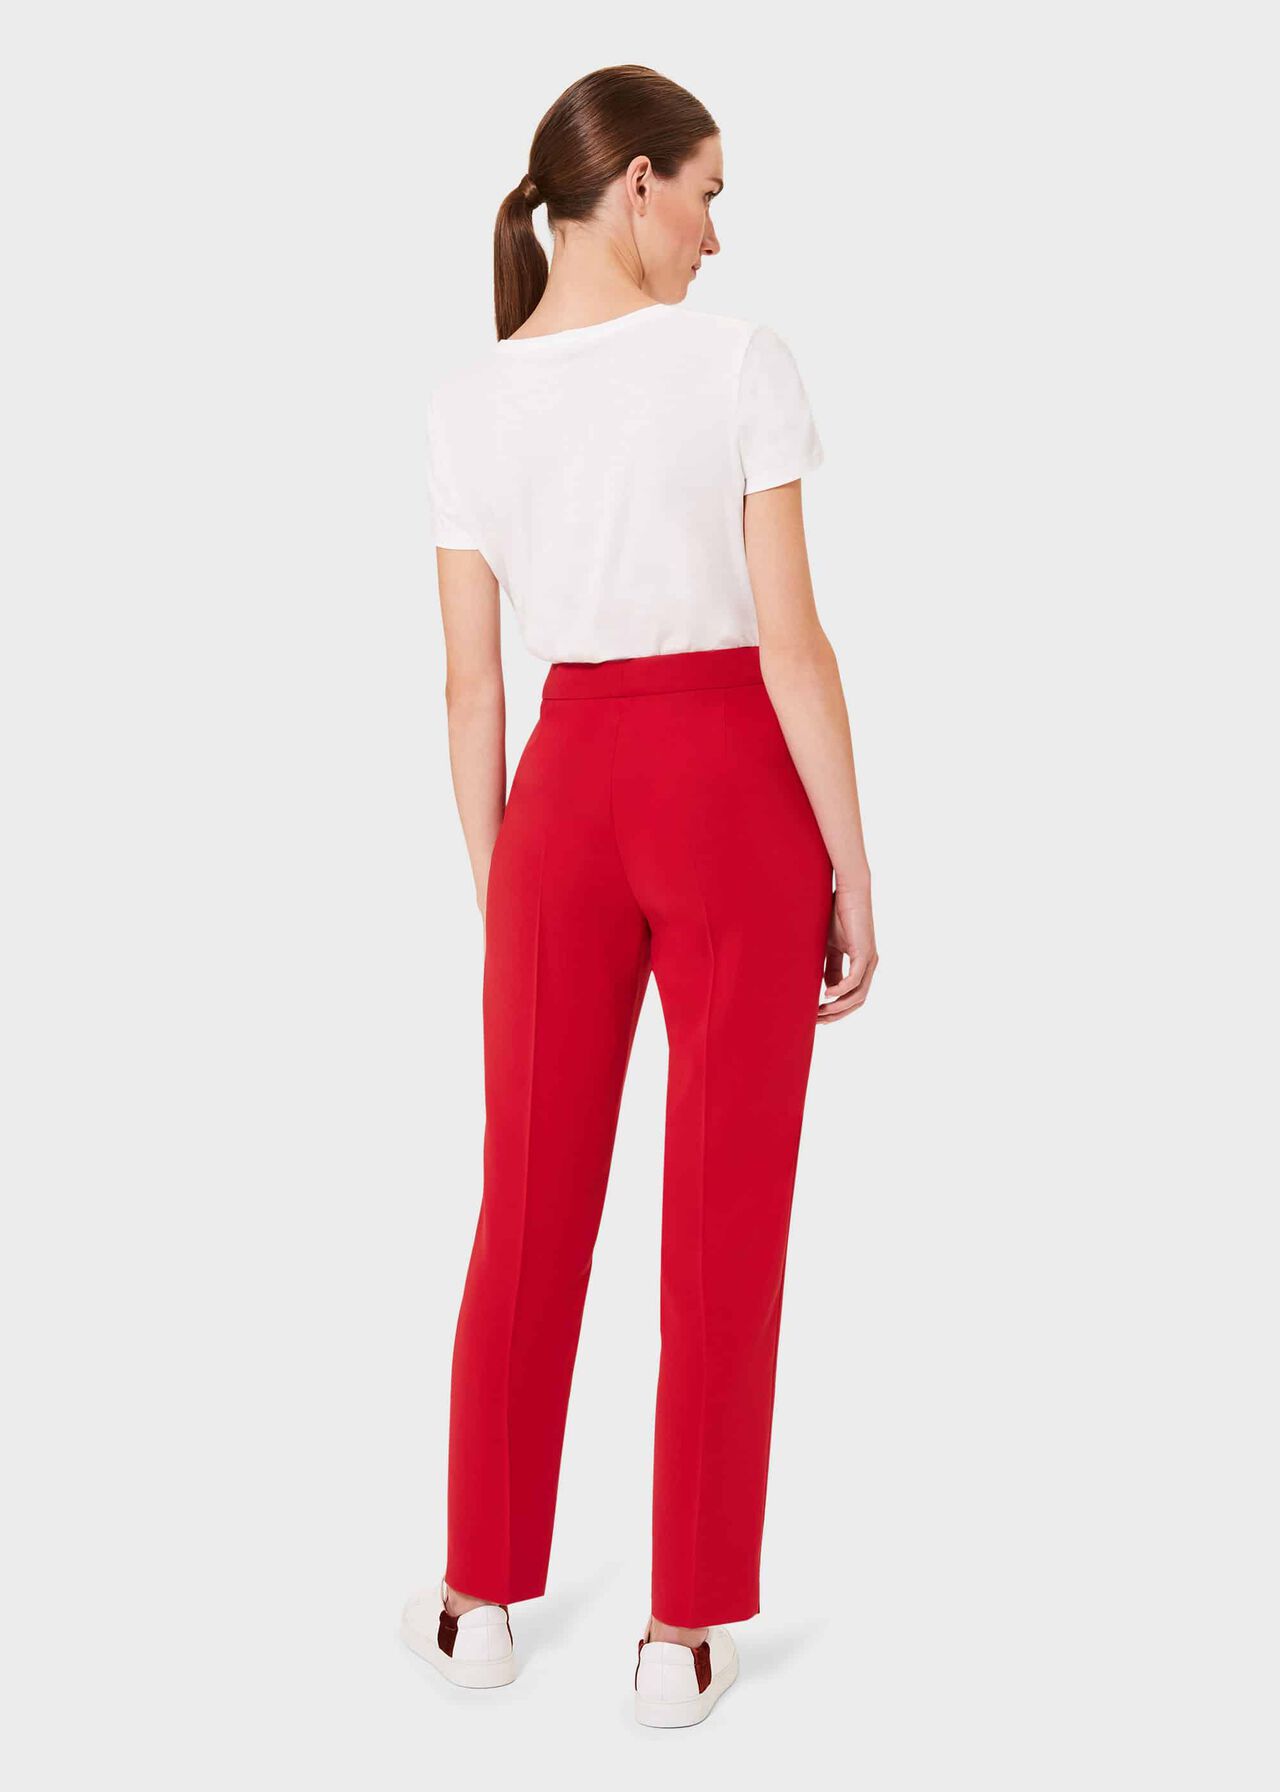 Zinnia Tapered trousers, Red, hi-res